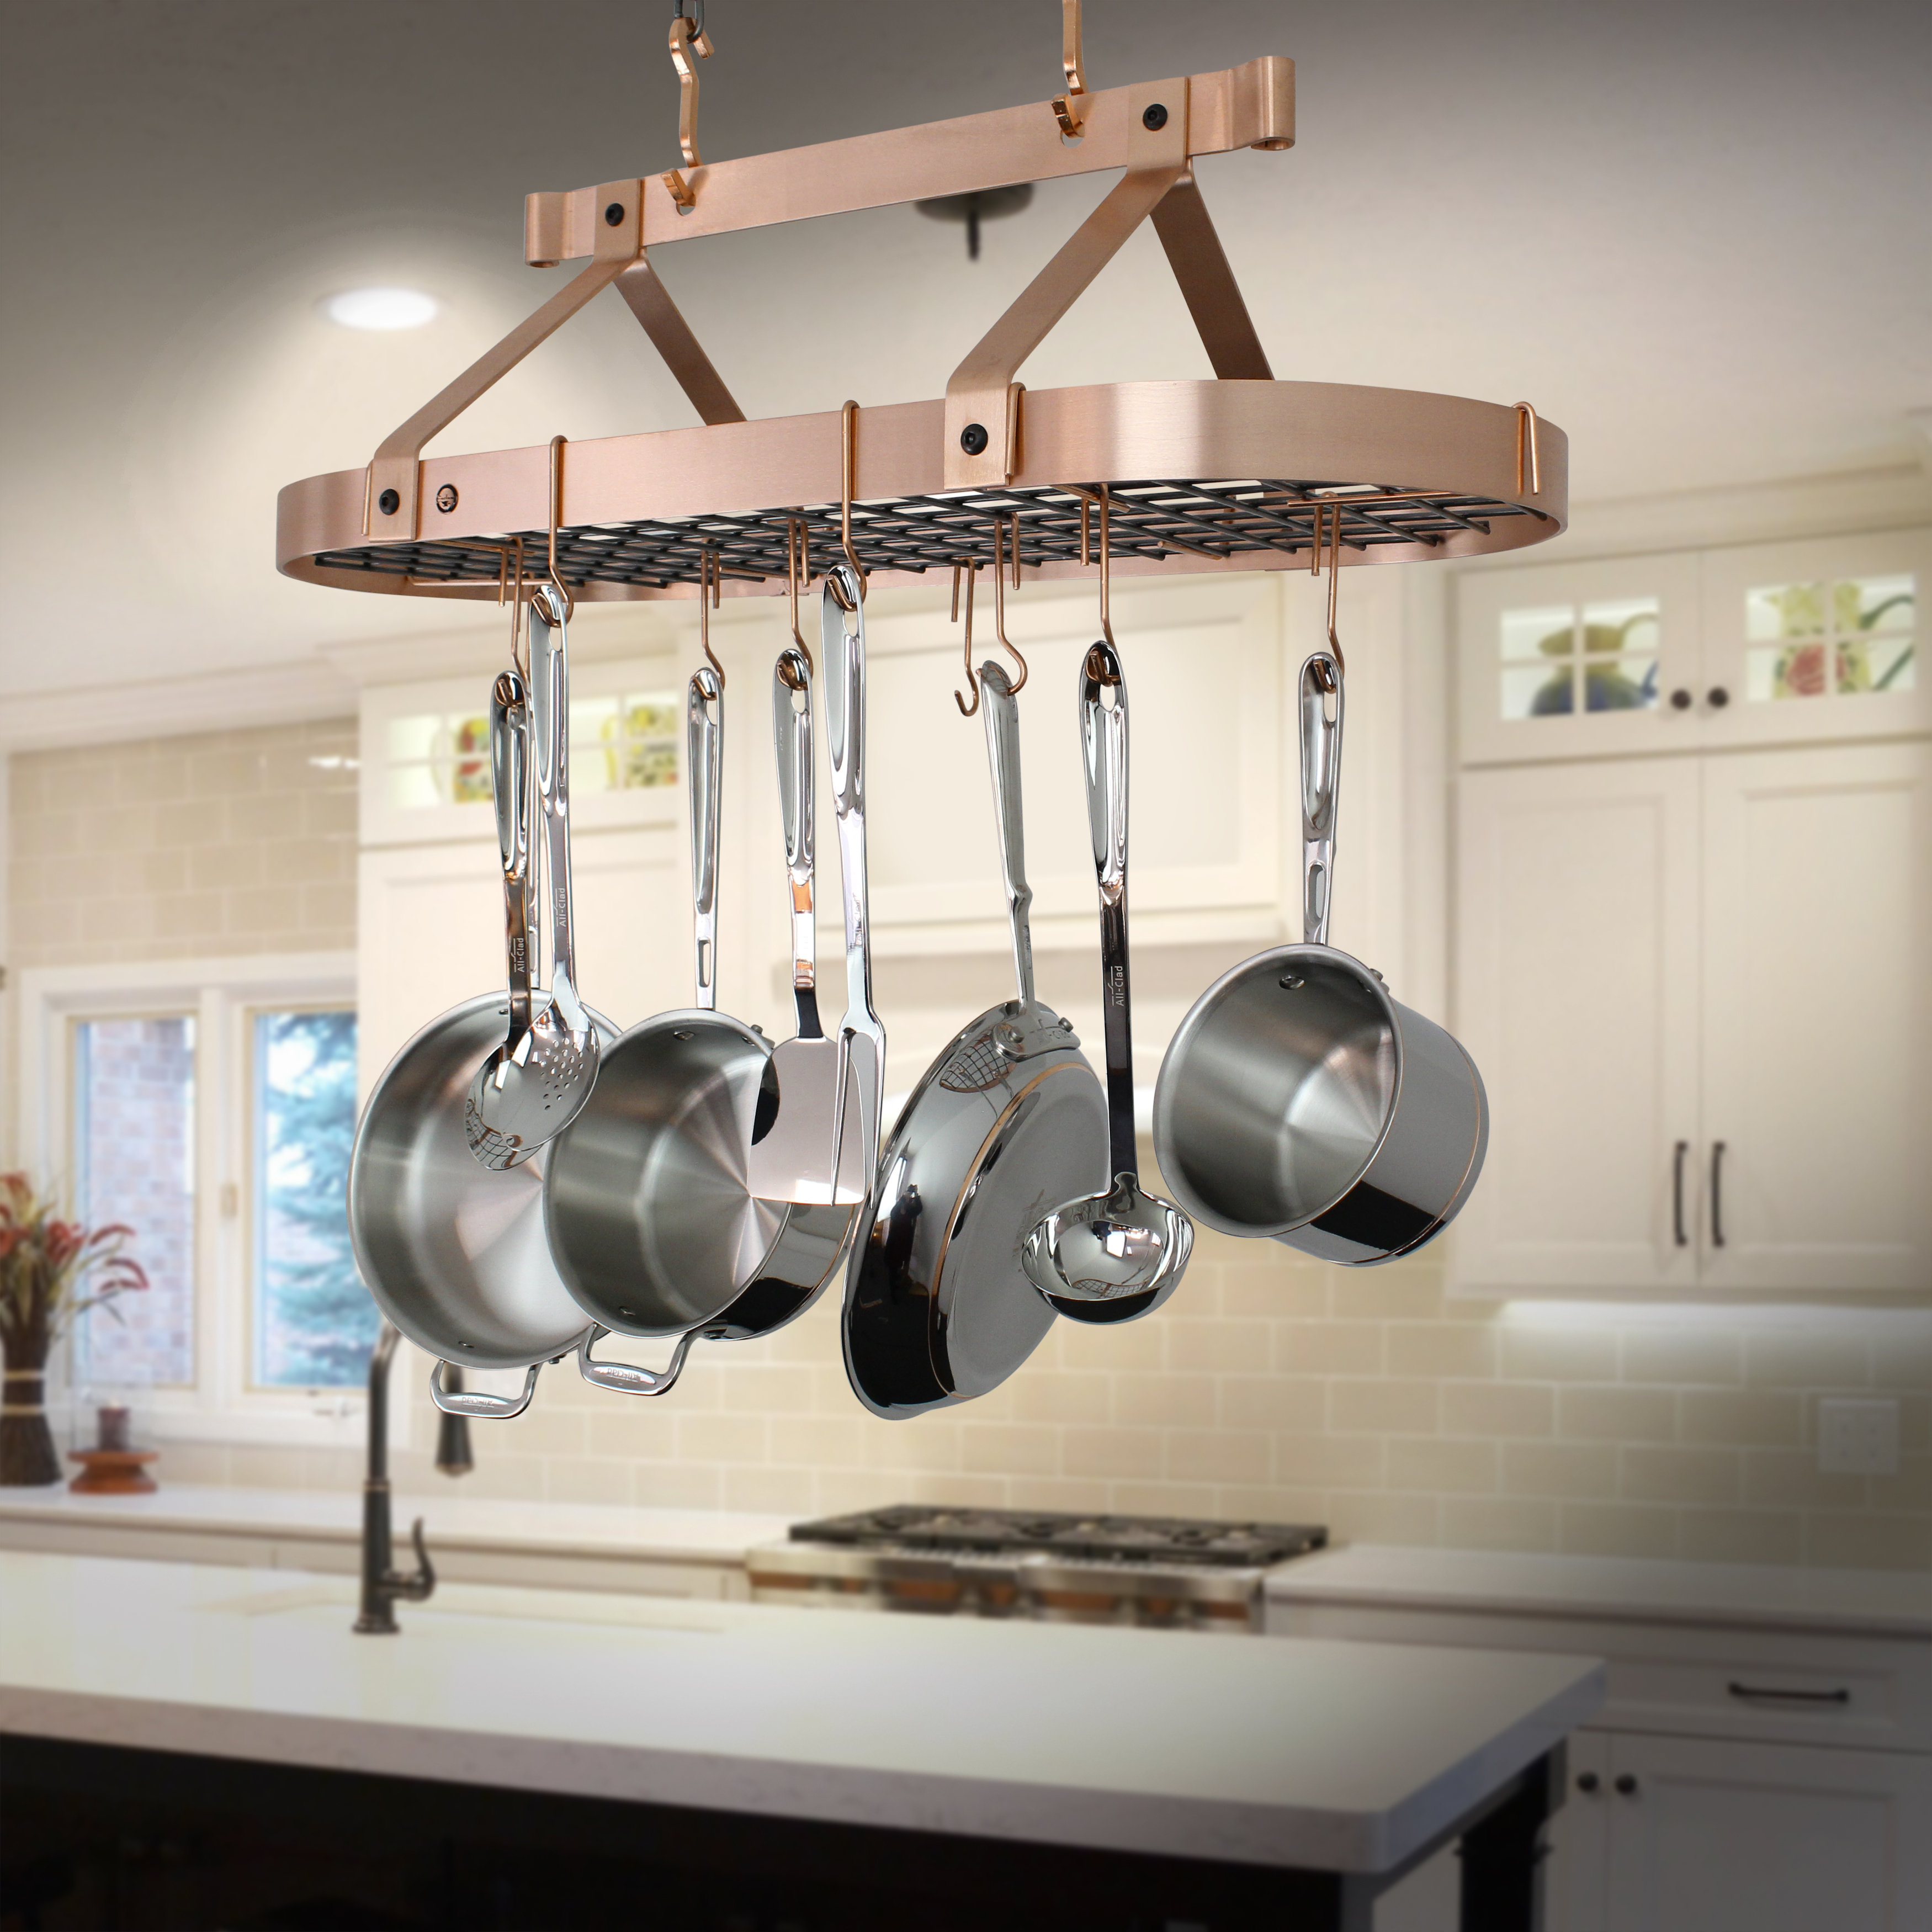 Handcrafted Oval Ceiling Hanging Pot Rack